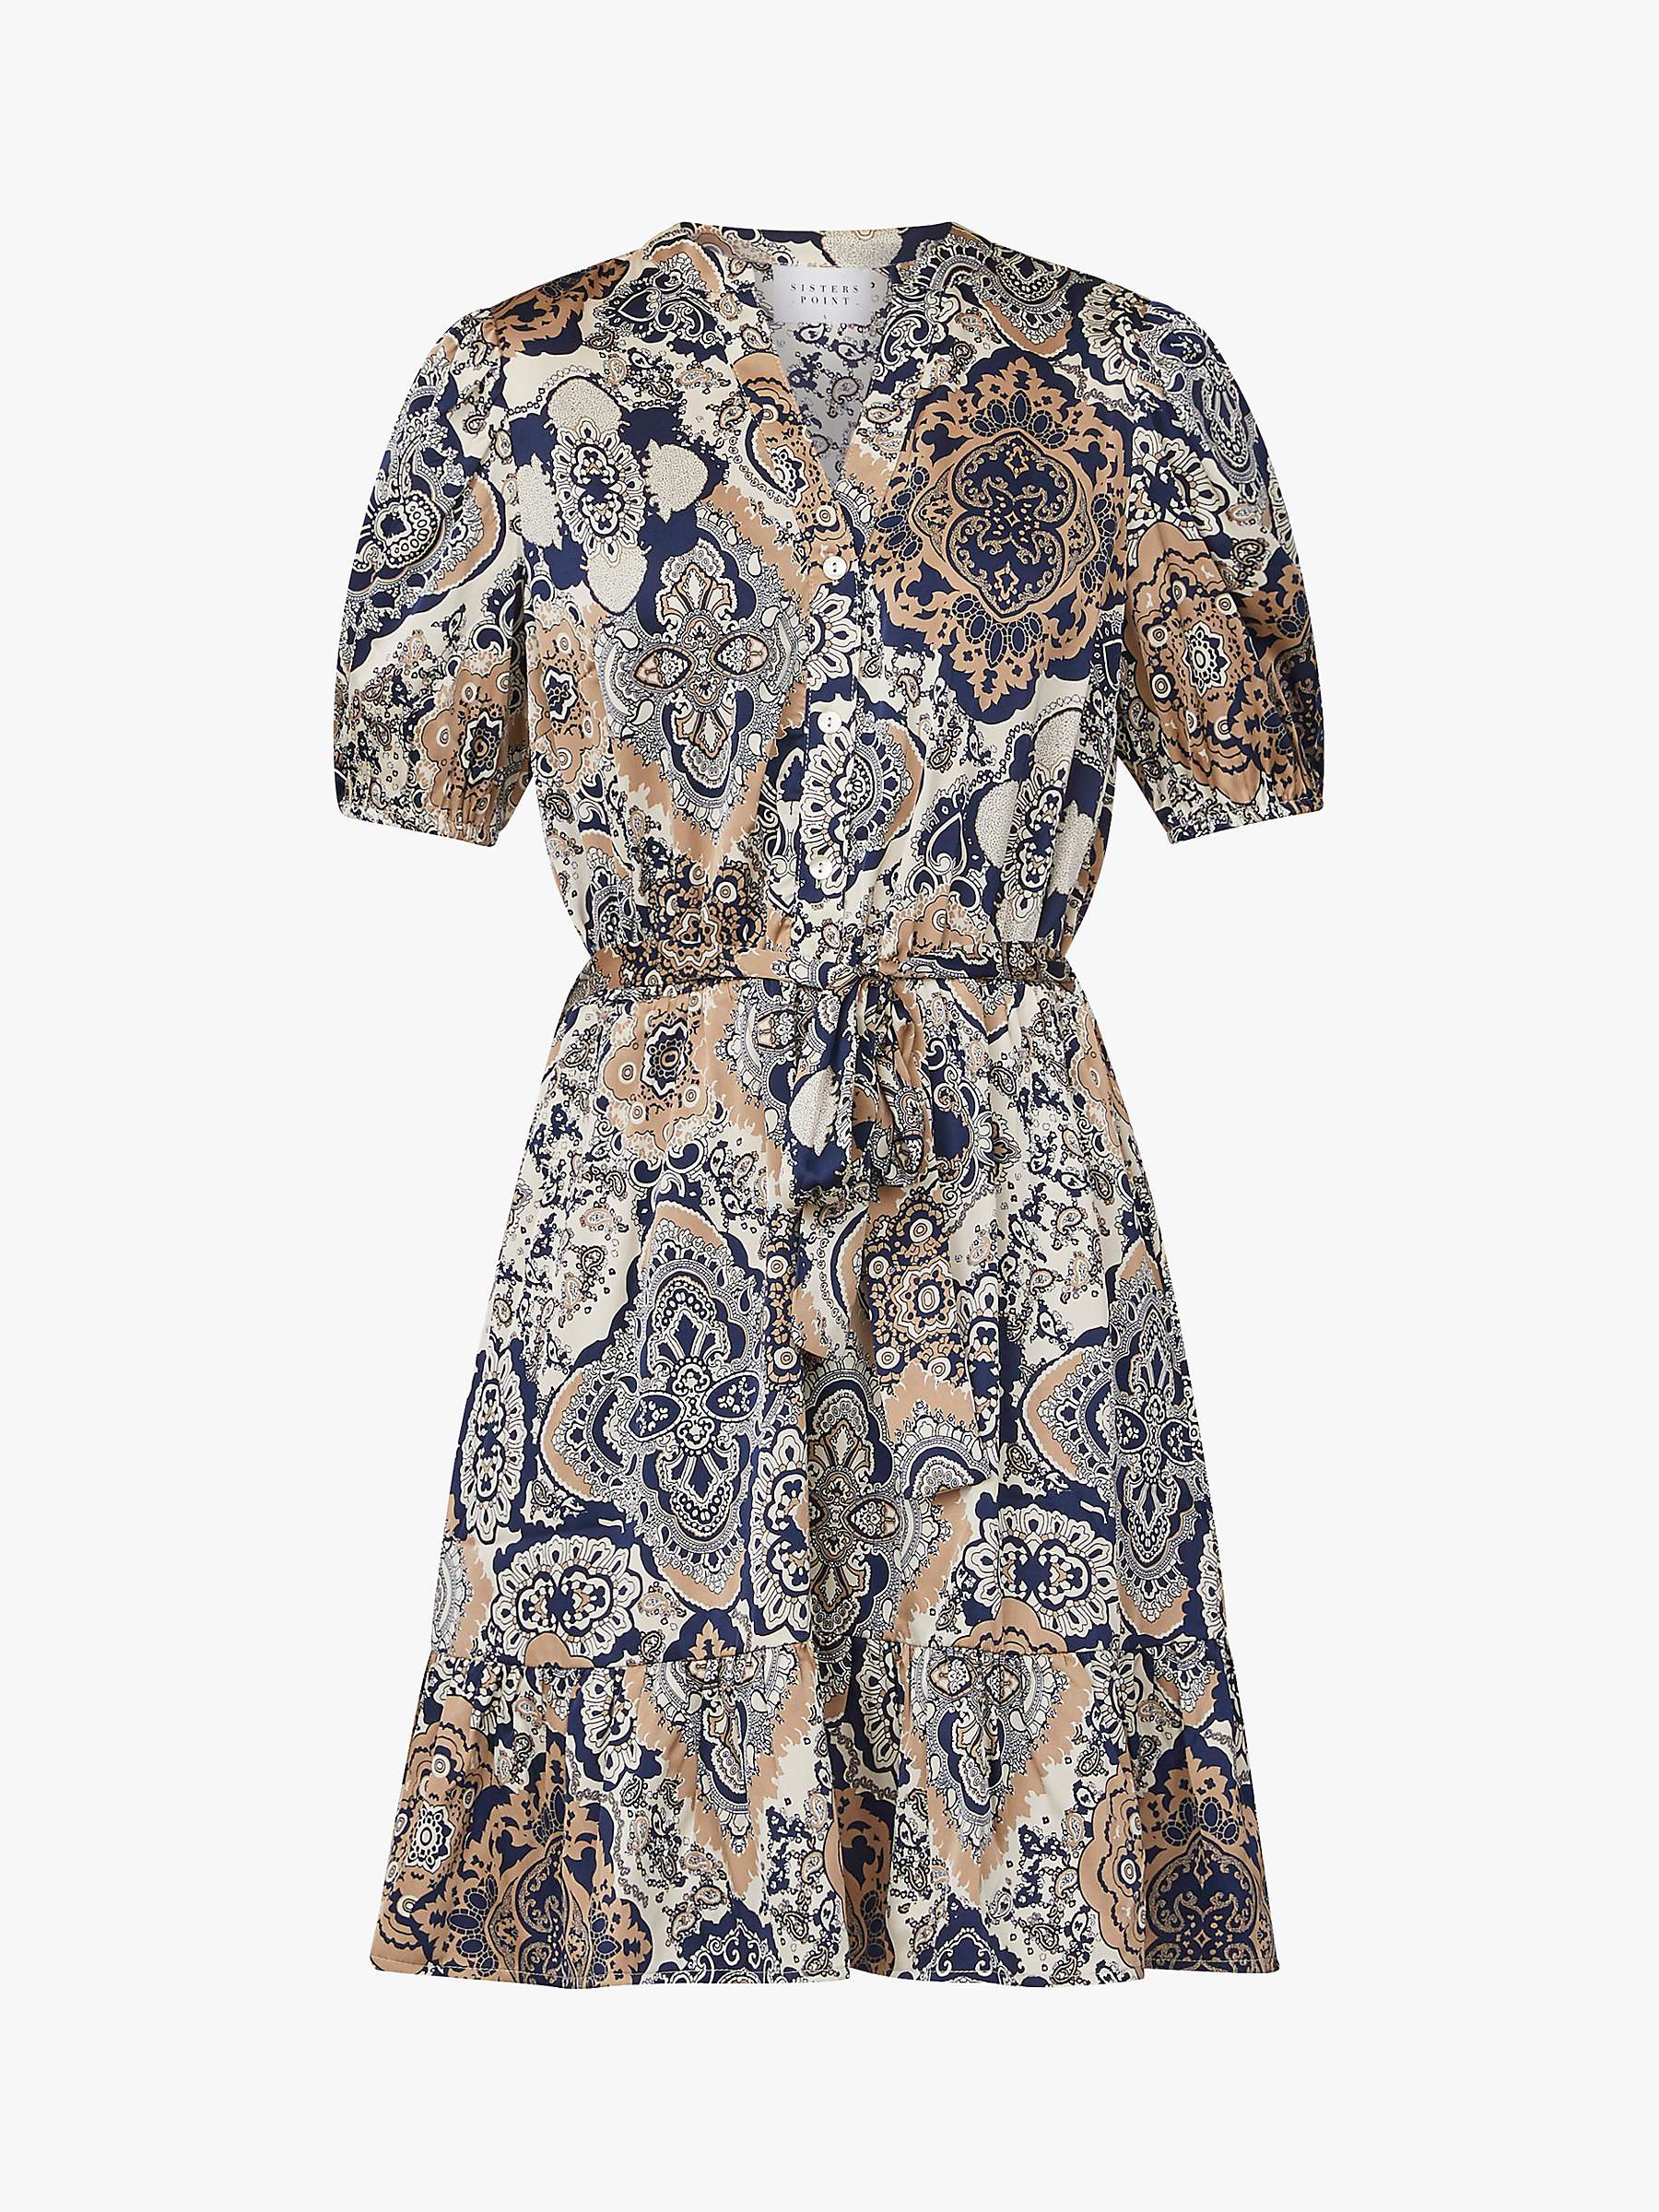 Buy Sisters Point Uloa Mini Dress, Paisley Online at johnlewis.com